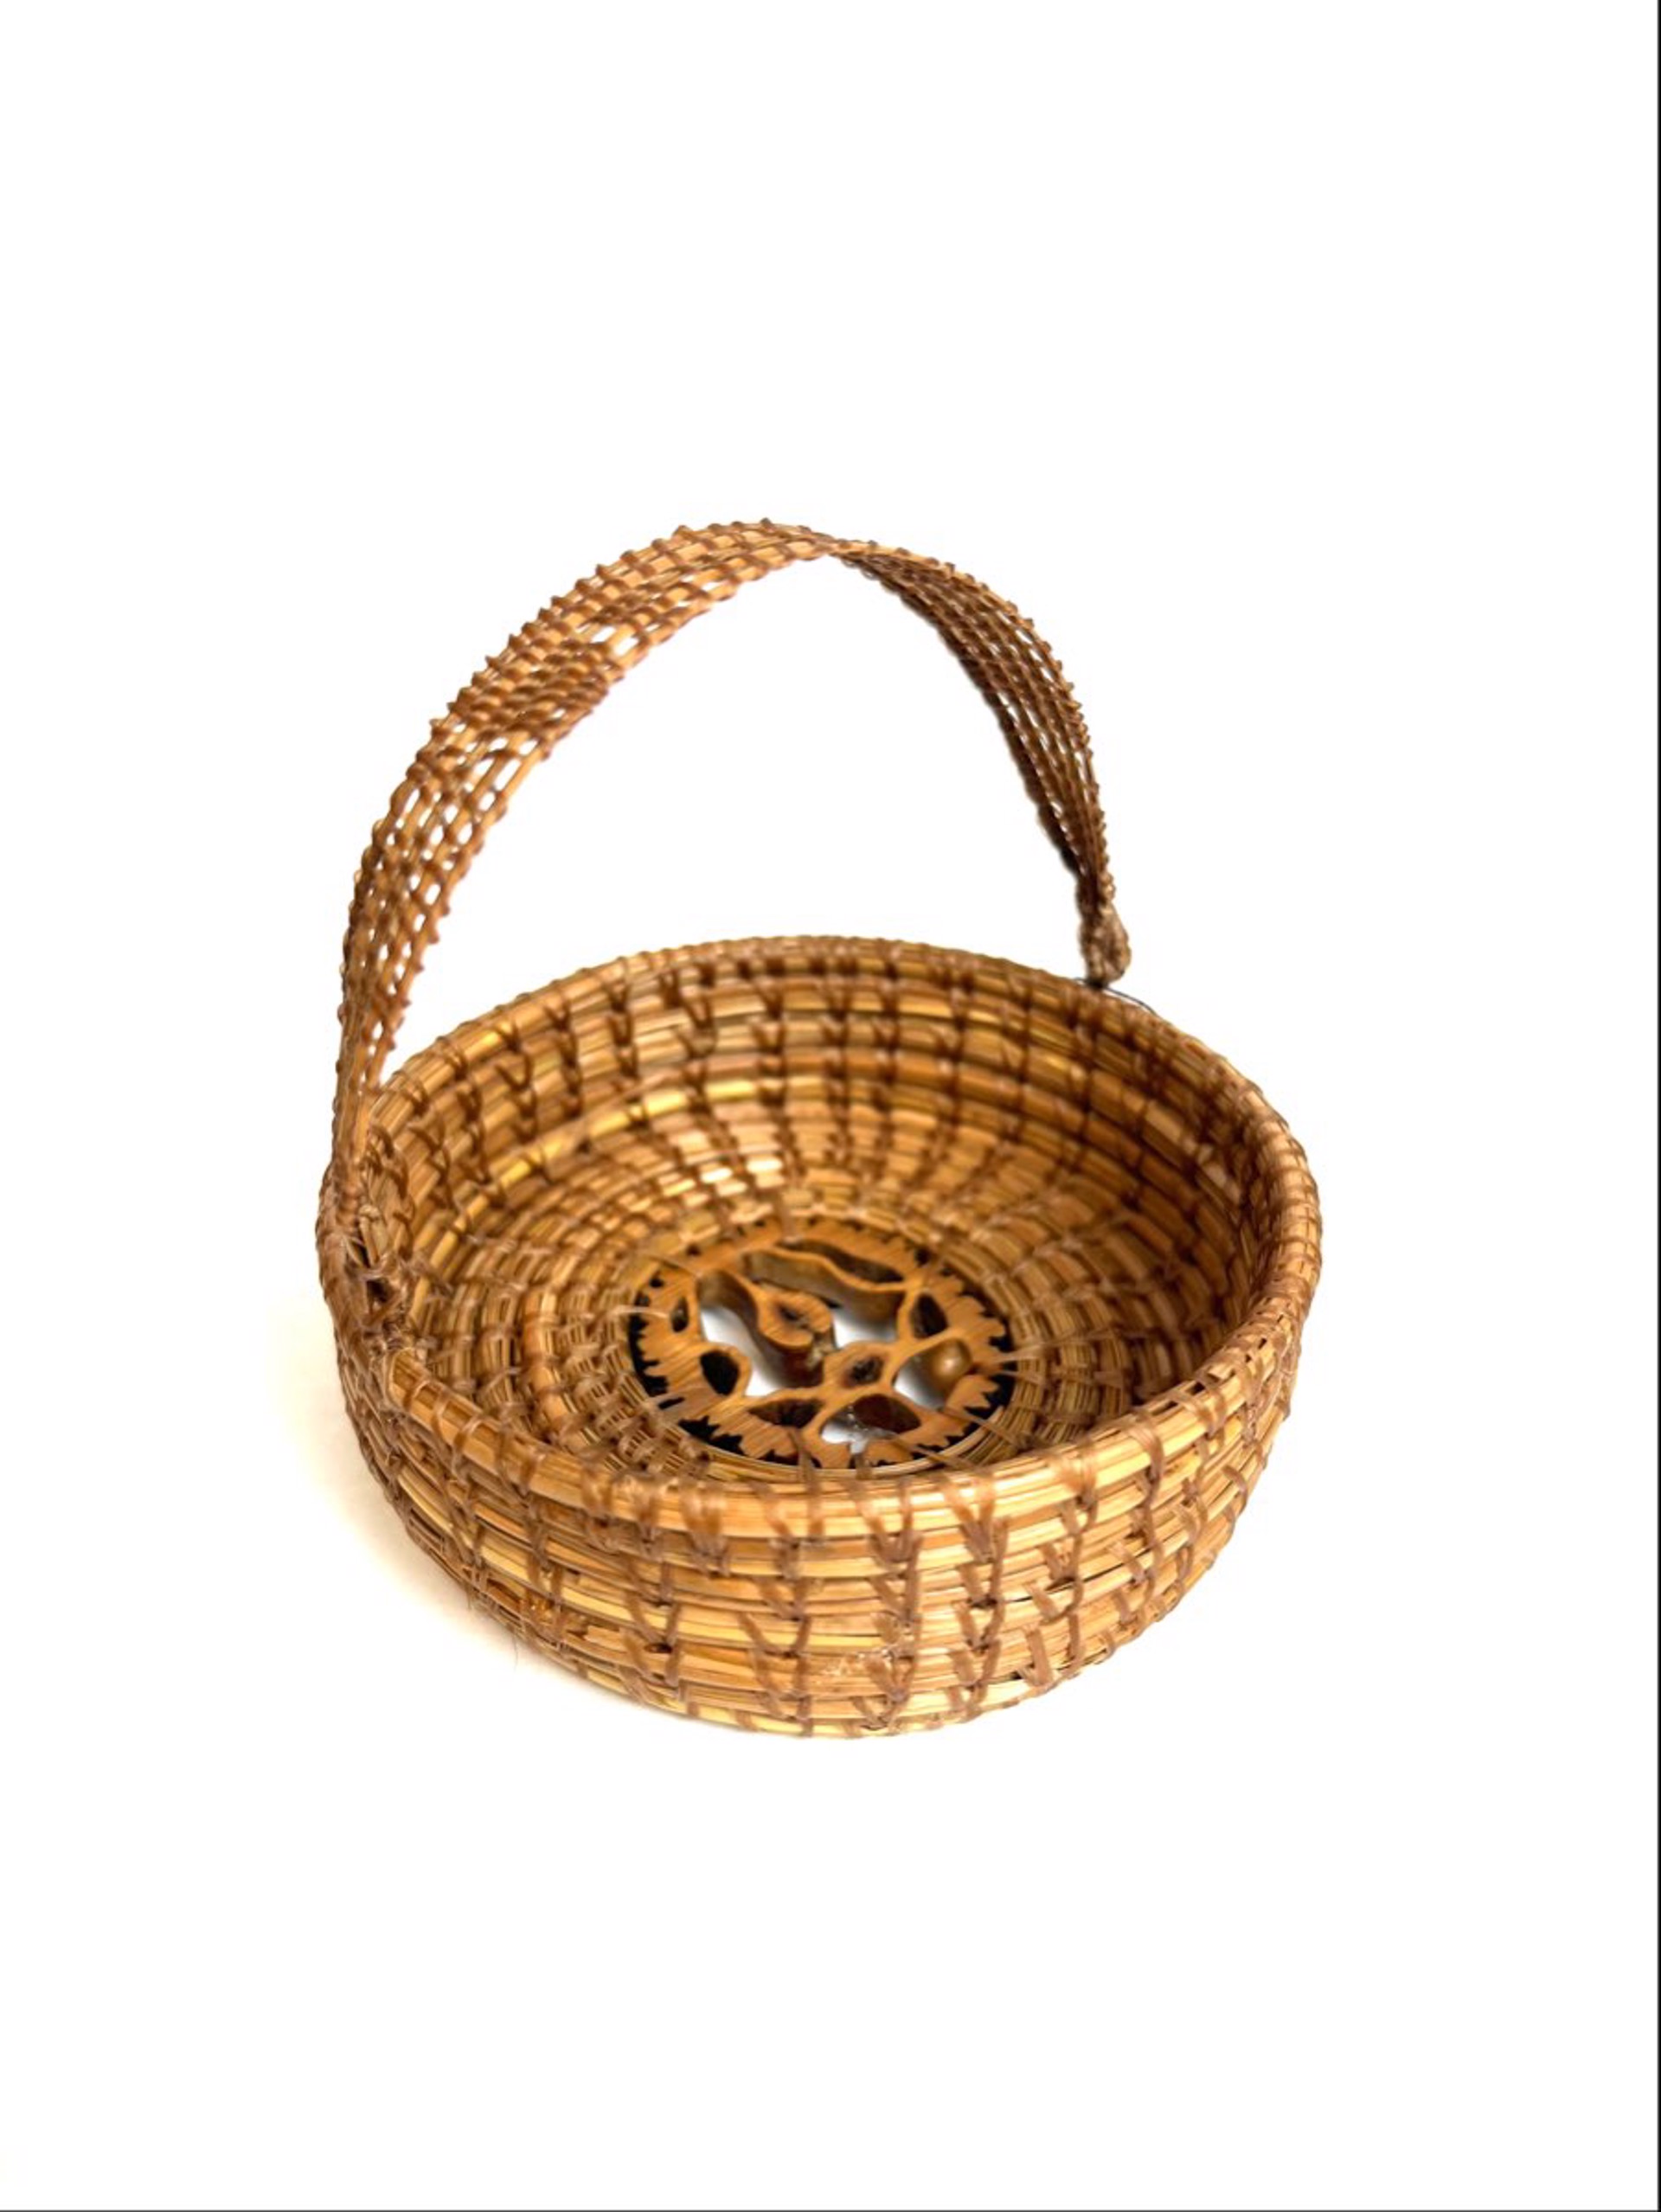 Basket with Walnut Center and Swing Woven Handle by Jacqueline Green